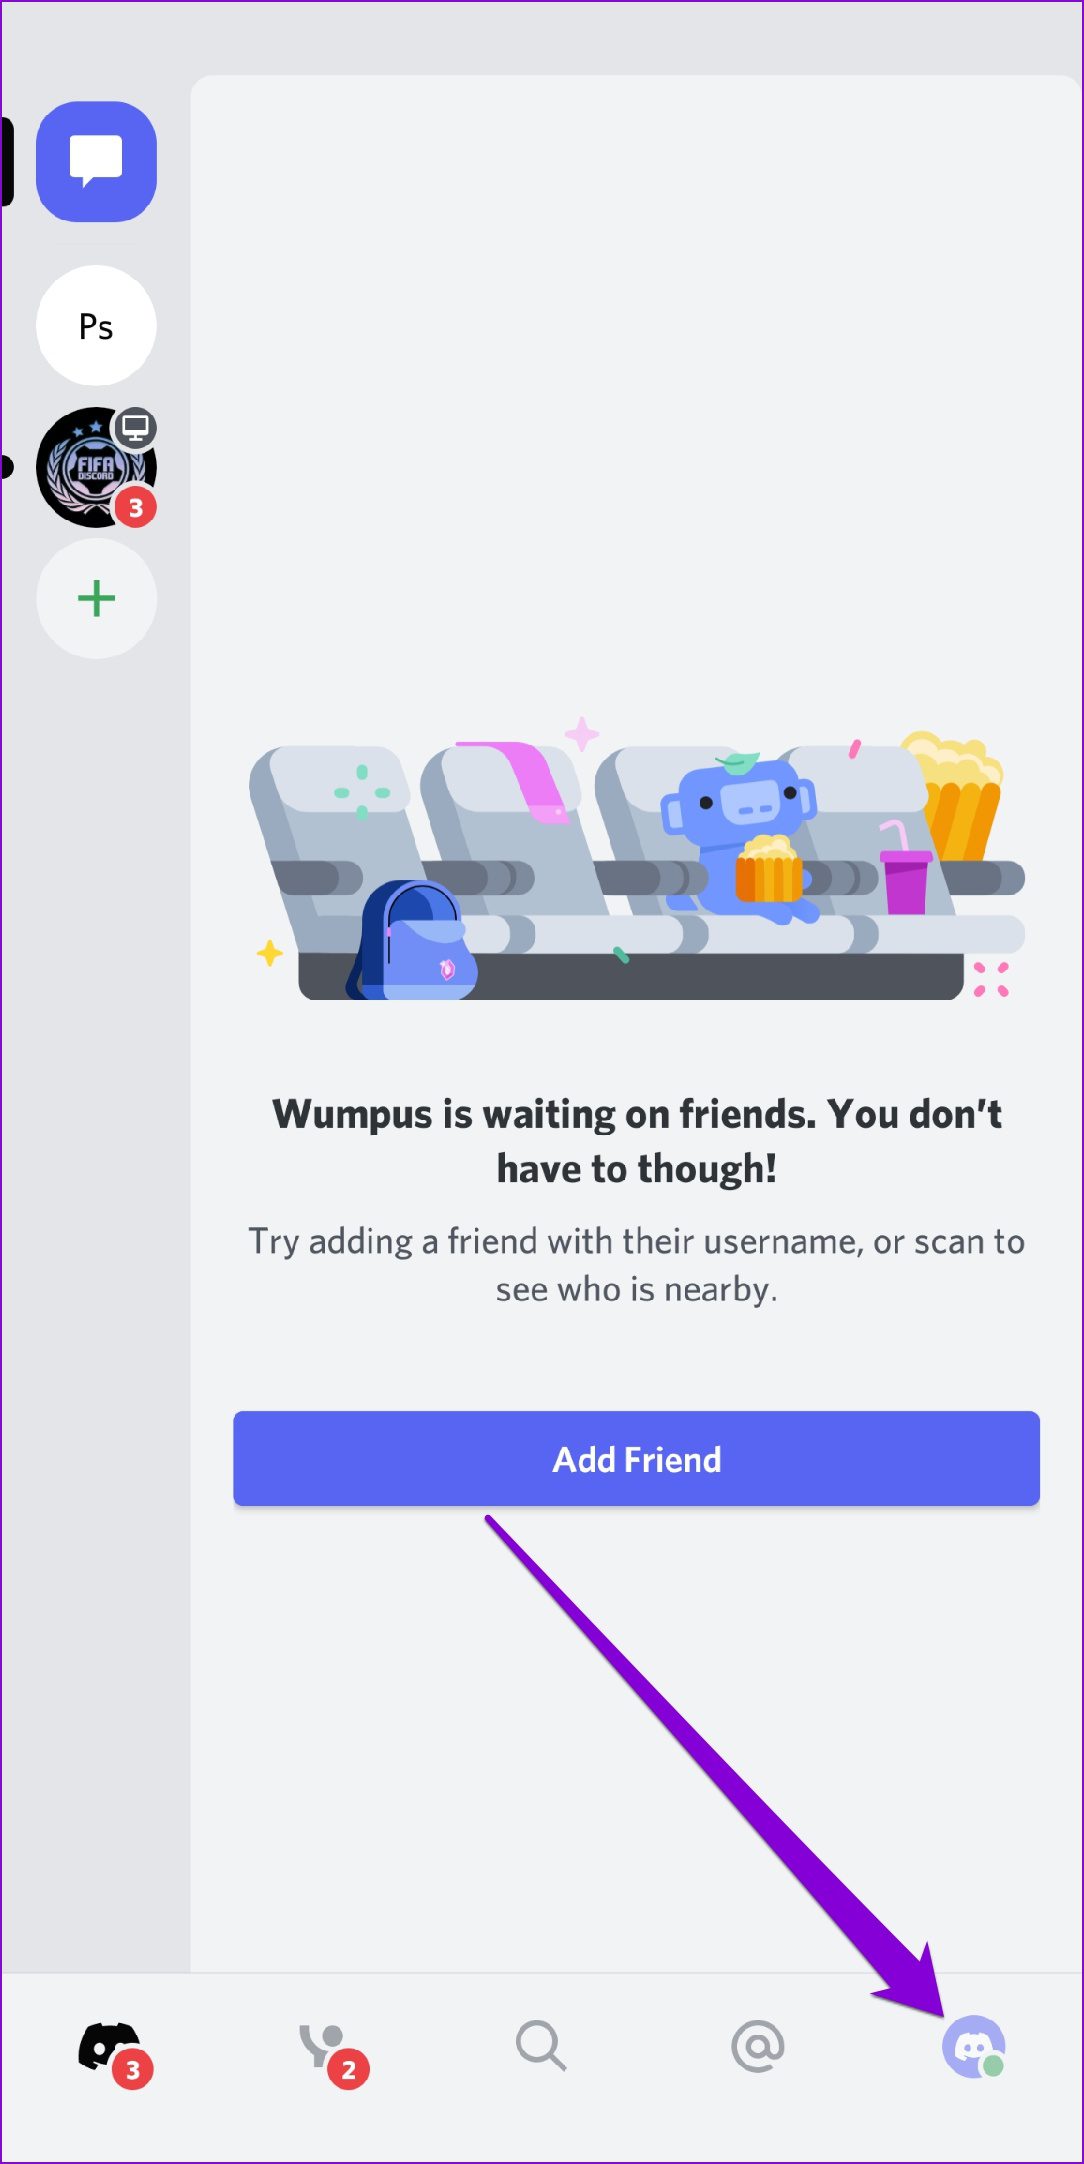 Discord app crashing: Why does Discord app keep crashing? How to fix?, Gaming, Entertainment